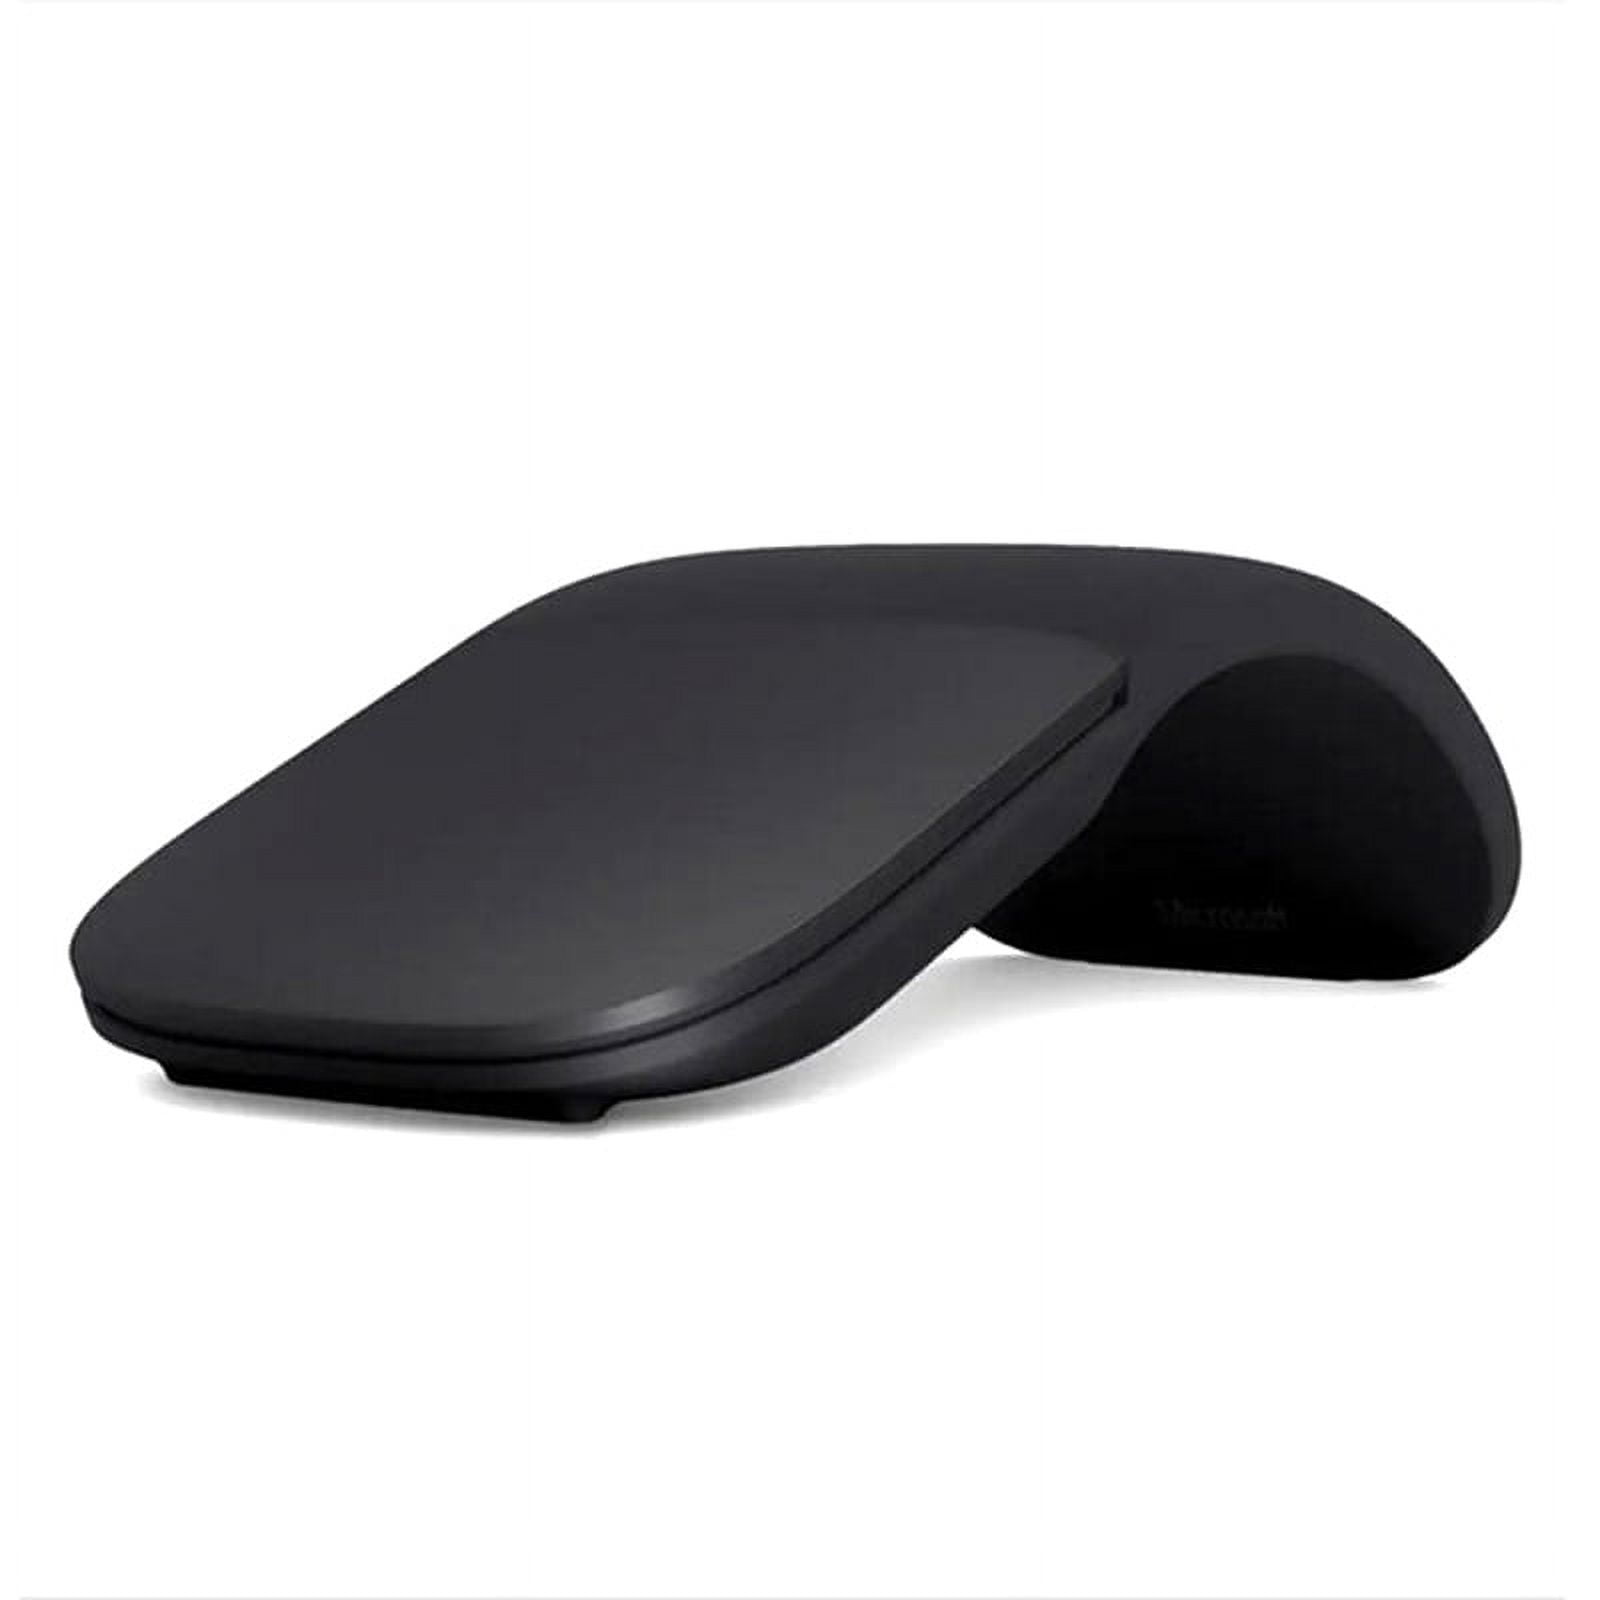  Microsoft Wireless Bluetooth Mouse (2022), Sculpted Design for  Ultimate Comfort and Smooth Scrolling, up to 1 Year of Battery Life, 2.4G  Range, Forest Color